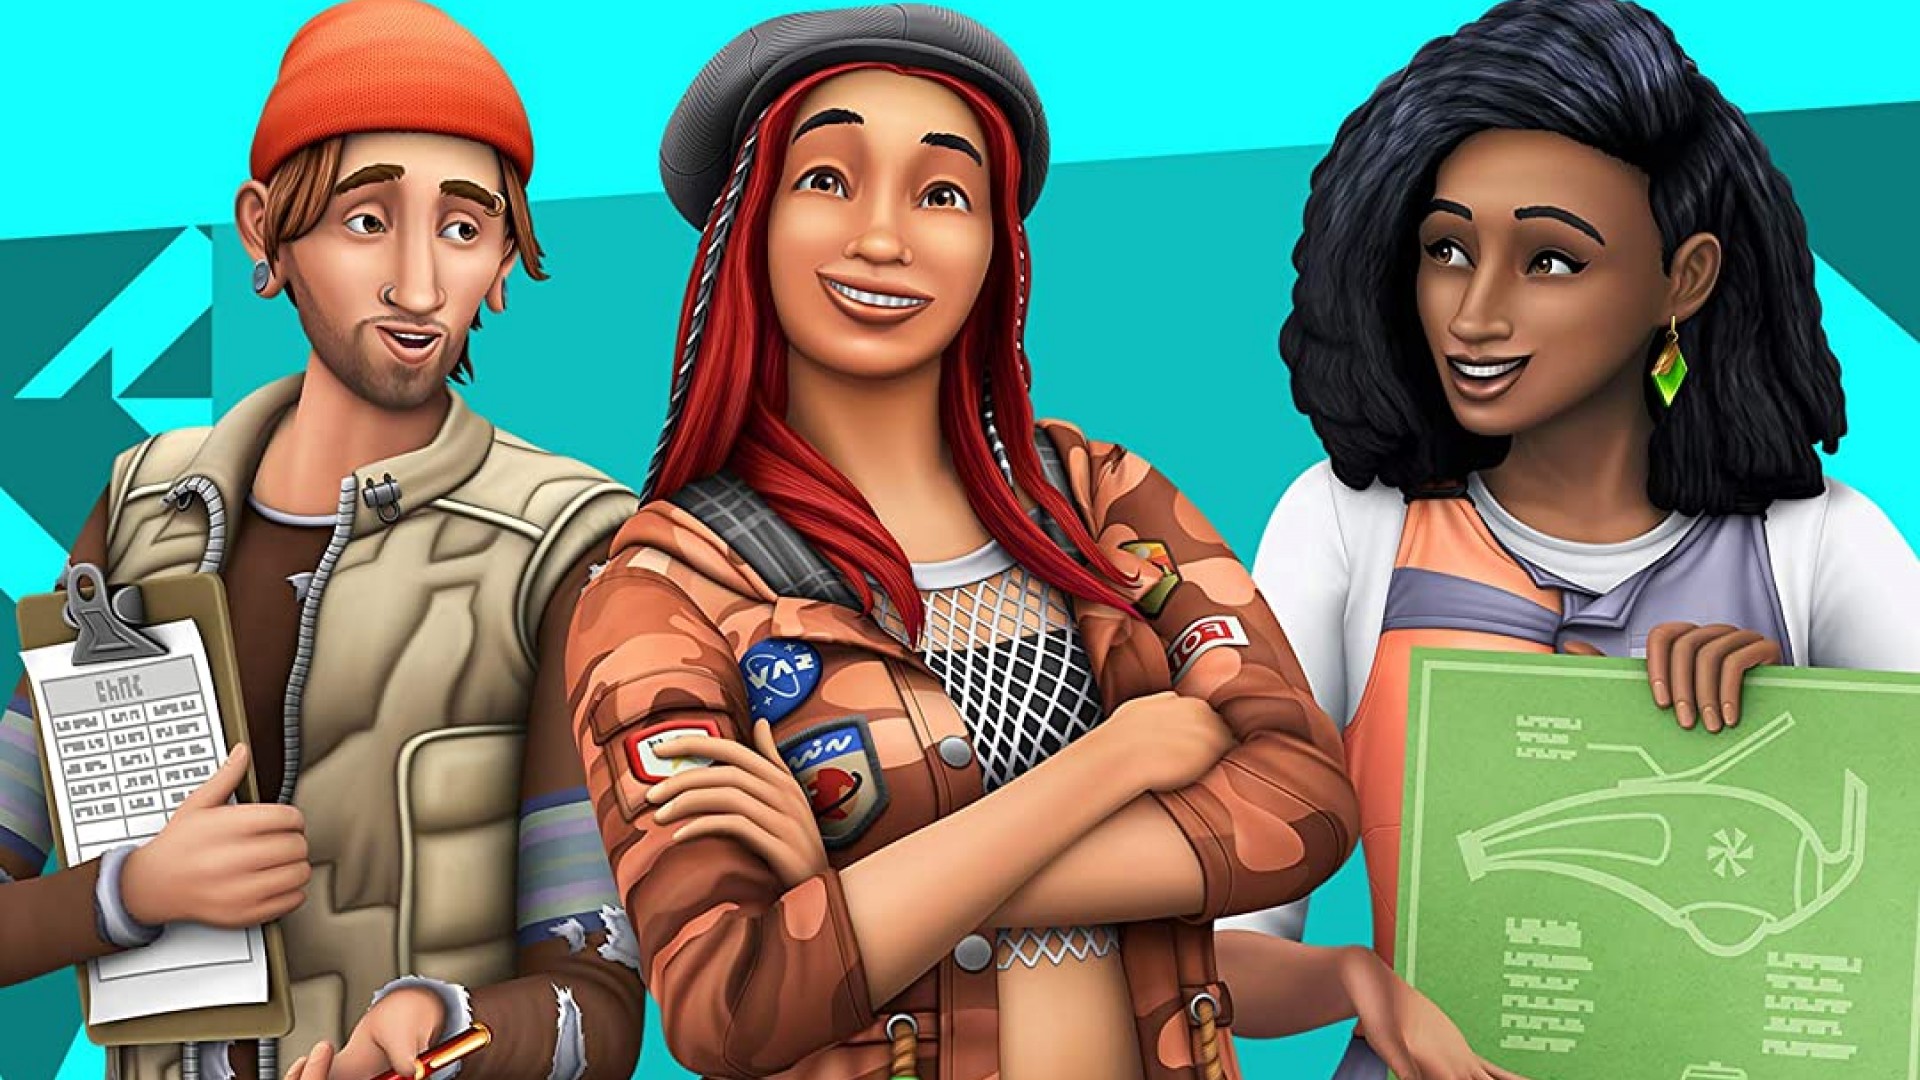 sims 4 only dlc free download 2018